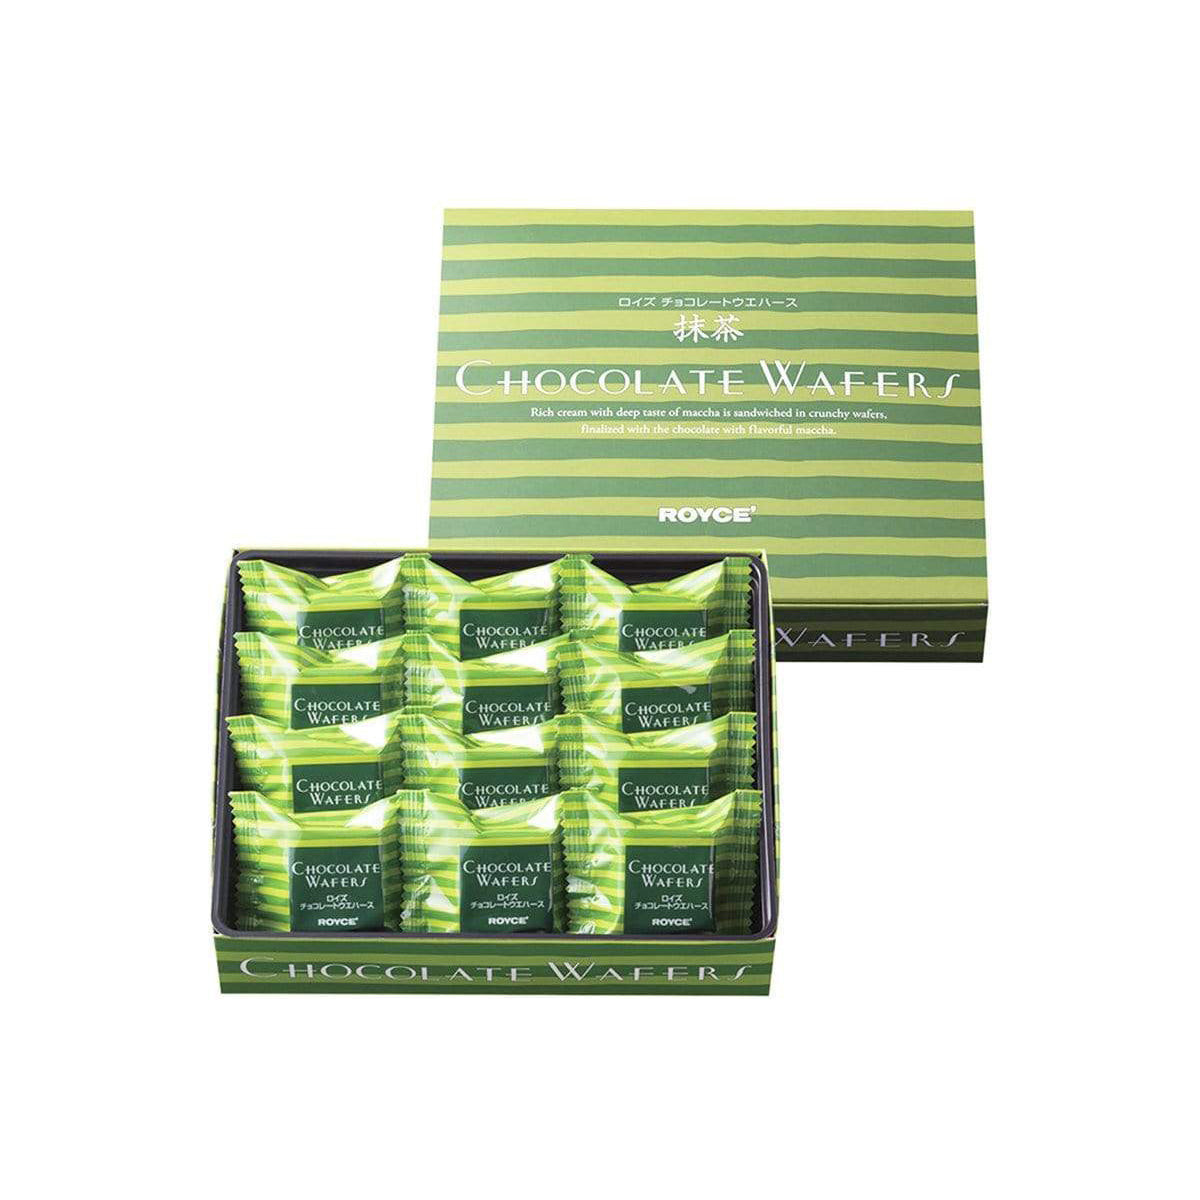 ROYCE' Chocolate - Chocolate Wafers "Matcha" - Image on top shows a green striped box. White text says Chocolate Wafers Rich cream with deep taste of matcha is sandwiched in crunchy wafers, finalized with the chocolate with flavorful matcha. ROYCE'. Text on the bottom part says Chocolate Wafers. Below is a green box filled with individually-wrapped wafers with green striped wrapper. White text on each says Chocolate Wafers ROYCE'. White text on the bottom part says Chocolate Wafers.